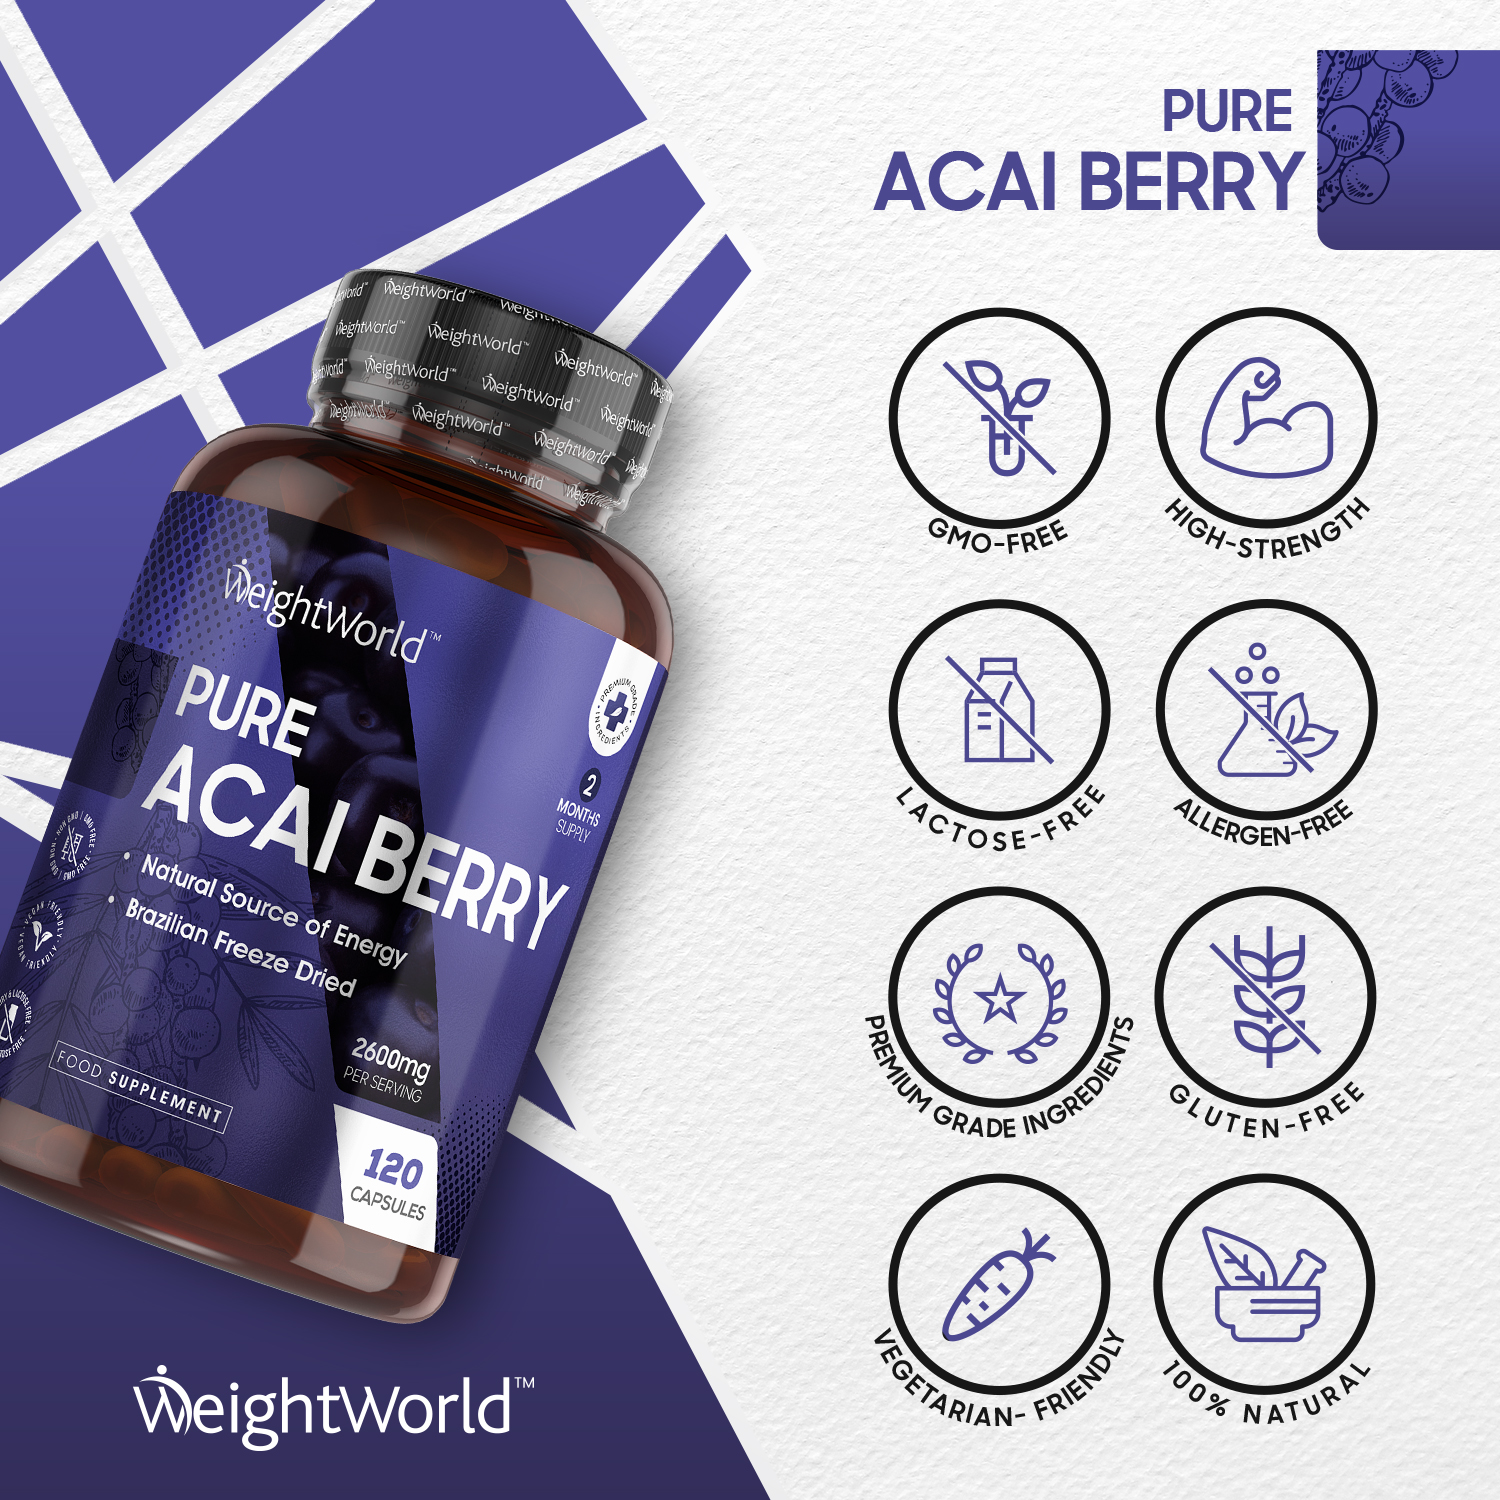 Acai Capsules from EarthBiotics - Simplified Nutritional Information